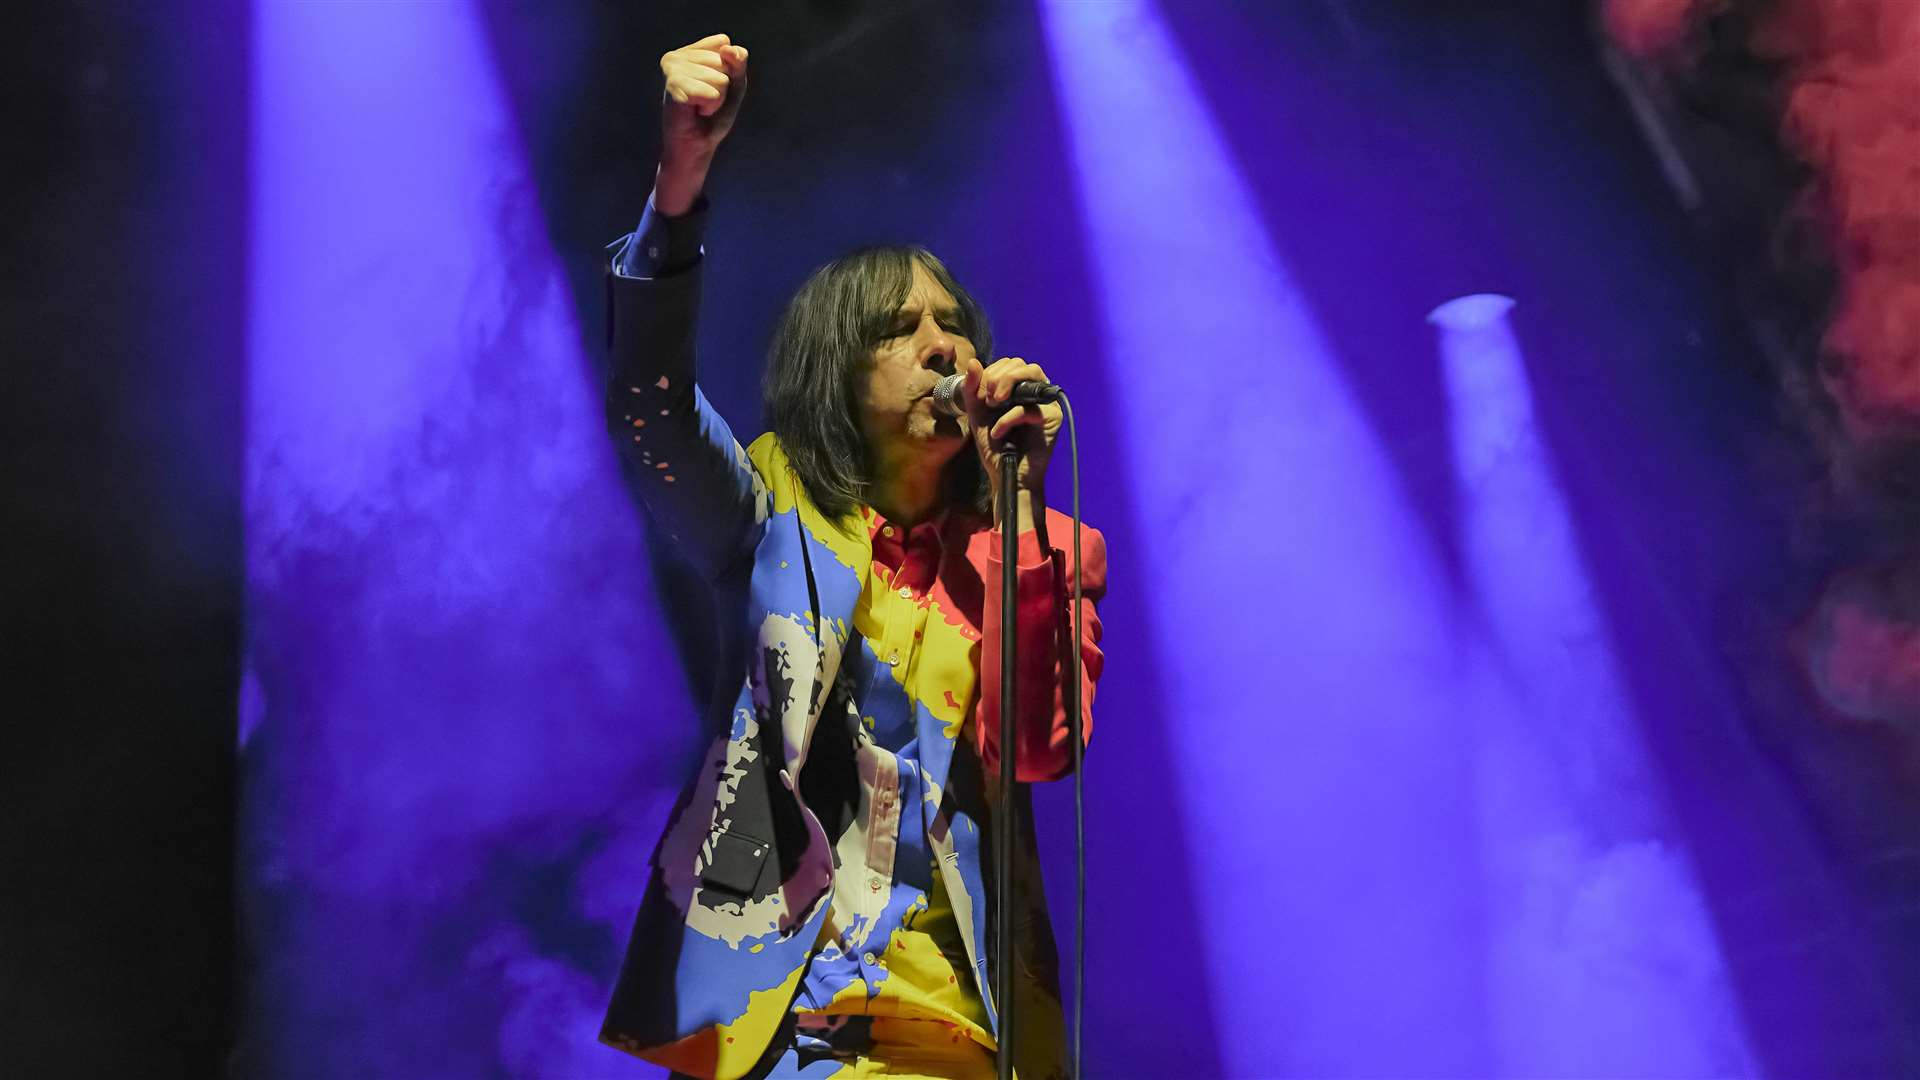 Primal Scream will be joined by Happy Mondays for their Dreamland concert